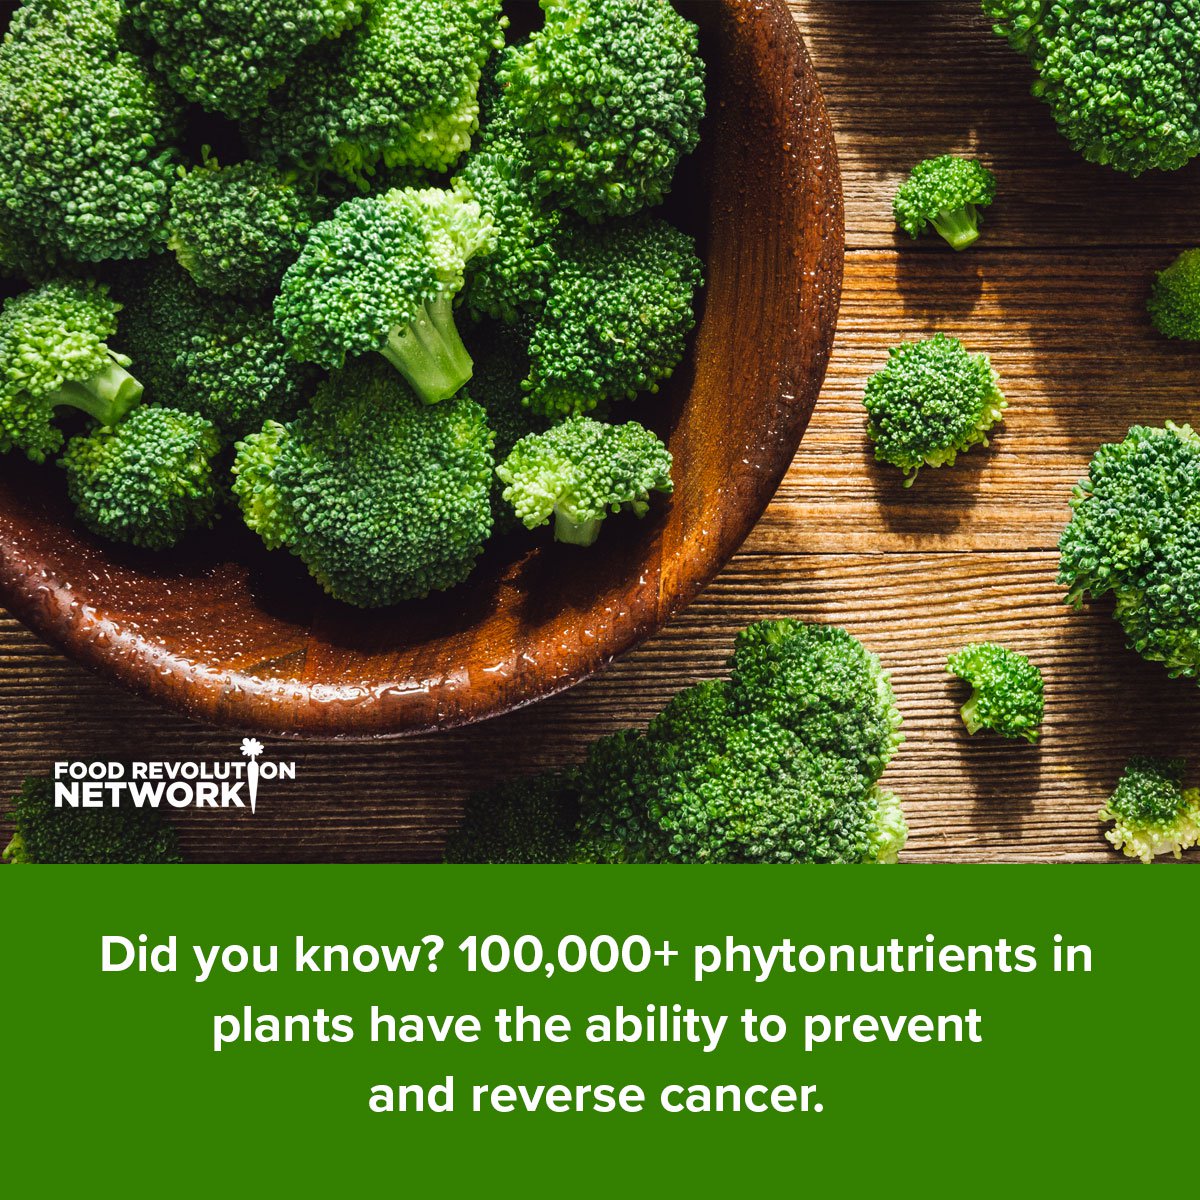 Did you know? 100,000+ phytonutrients in plants have the ability to prevent and reverse cancer.